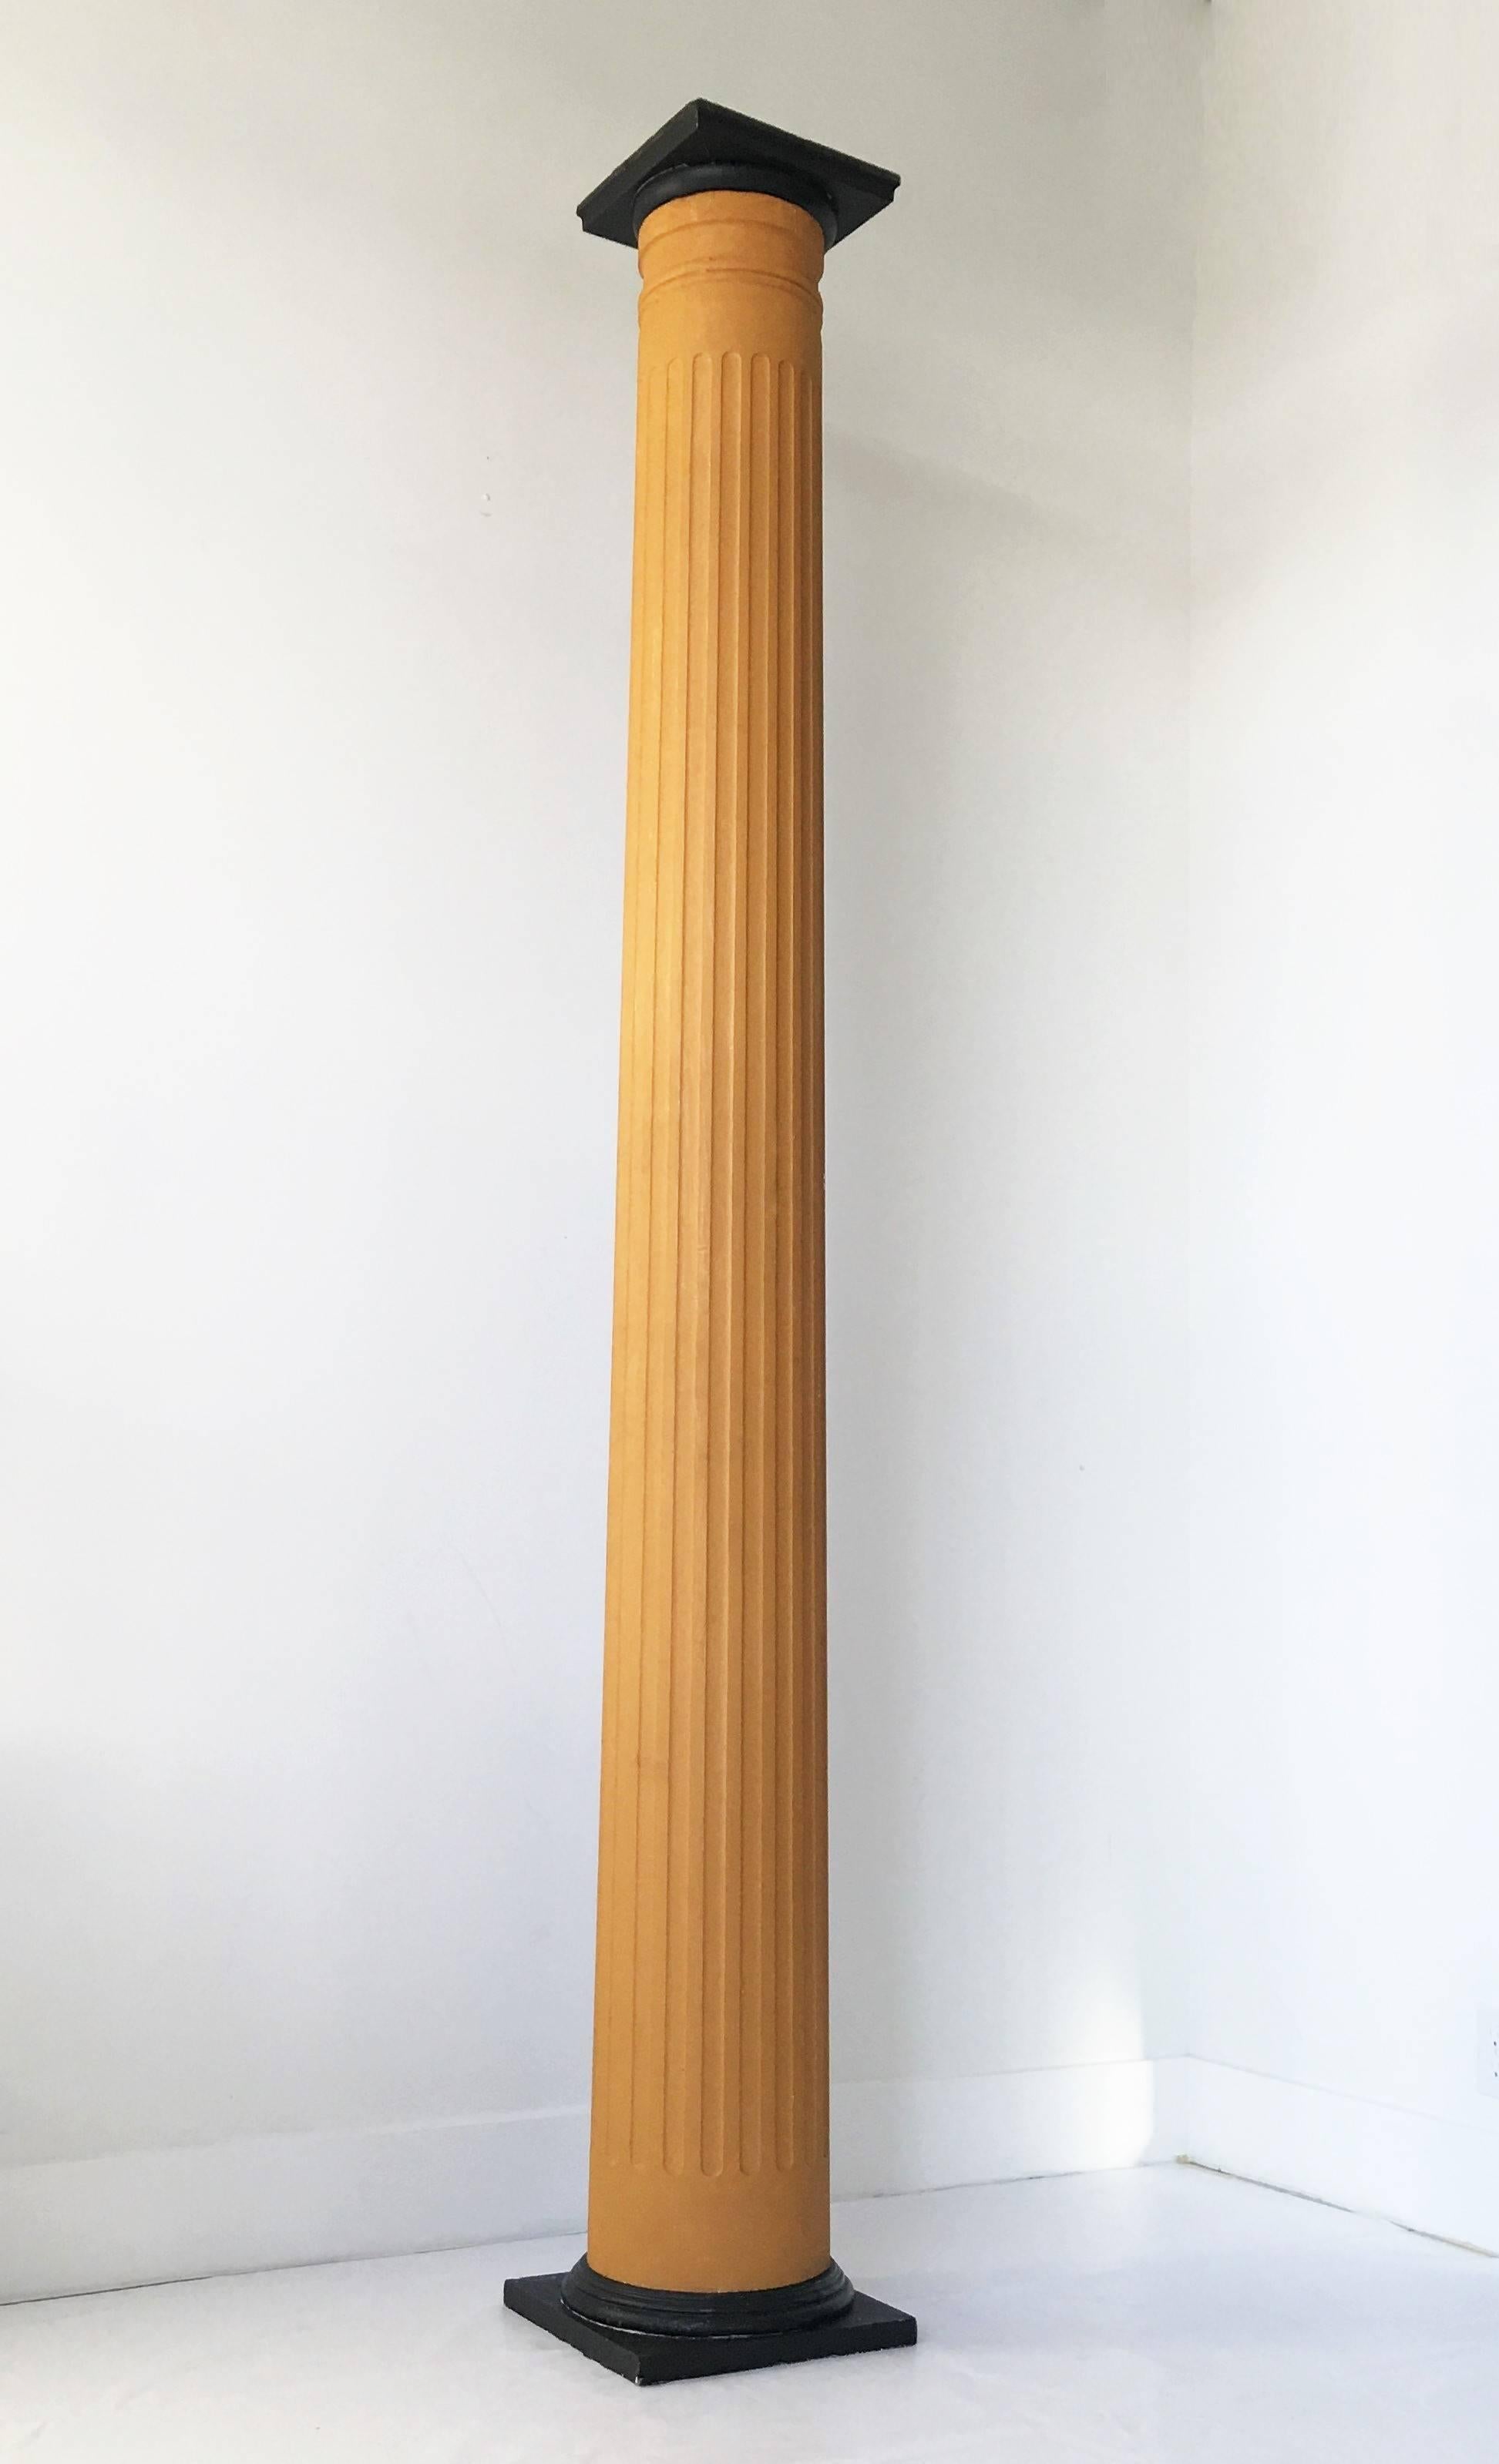 An impressive set of four architectural wood columns each in two parts, with square pedestal bases and fluted upper section.